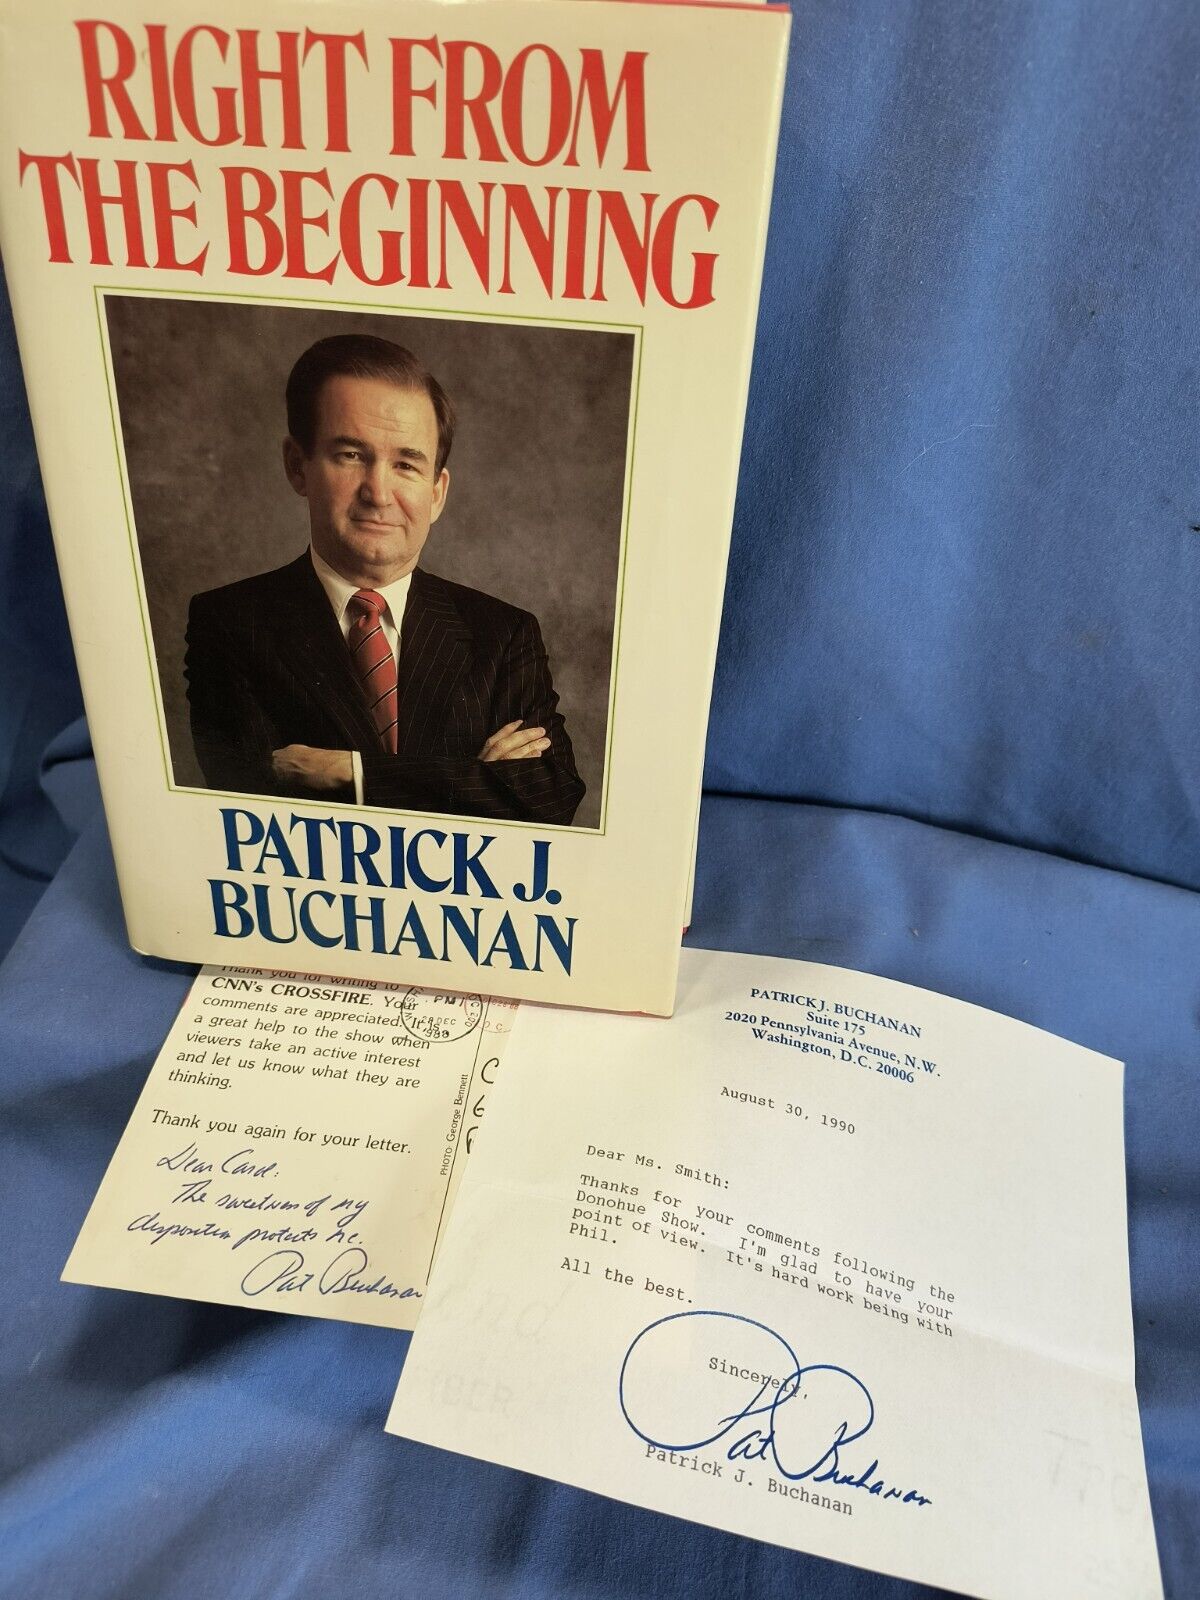 Patrick Buchanan SIGNED Lot Book CNN Crossfire Letter Right From The Beginning